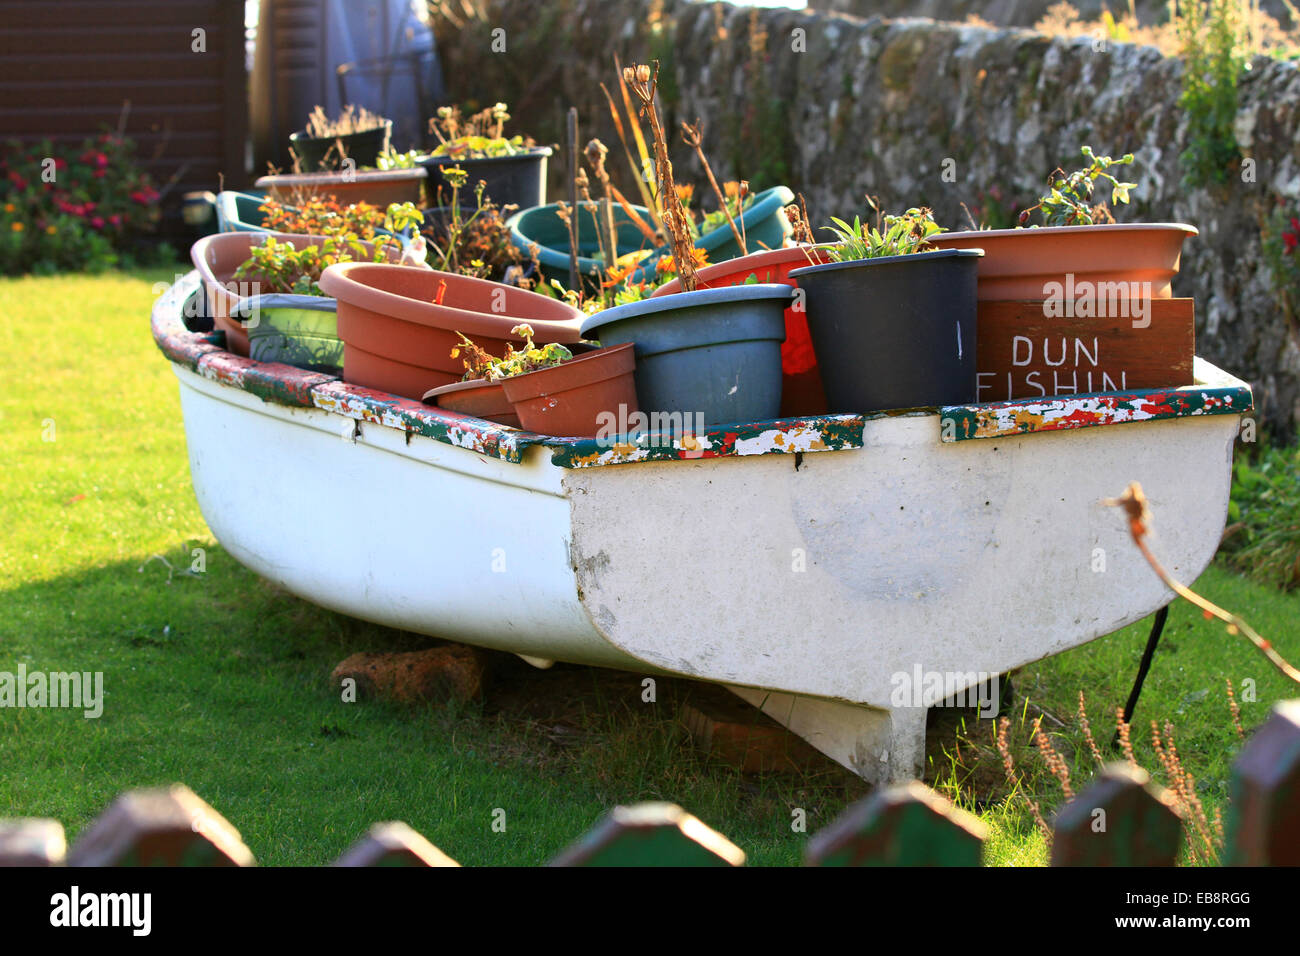 https://c8.alamy.com/comp/EB8RGG/old-small-sea-fishing-boat-turned-into-a-feature-for-plants-in-a-garden-EB8RGG.jpg